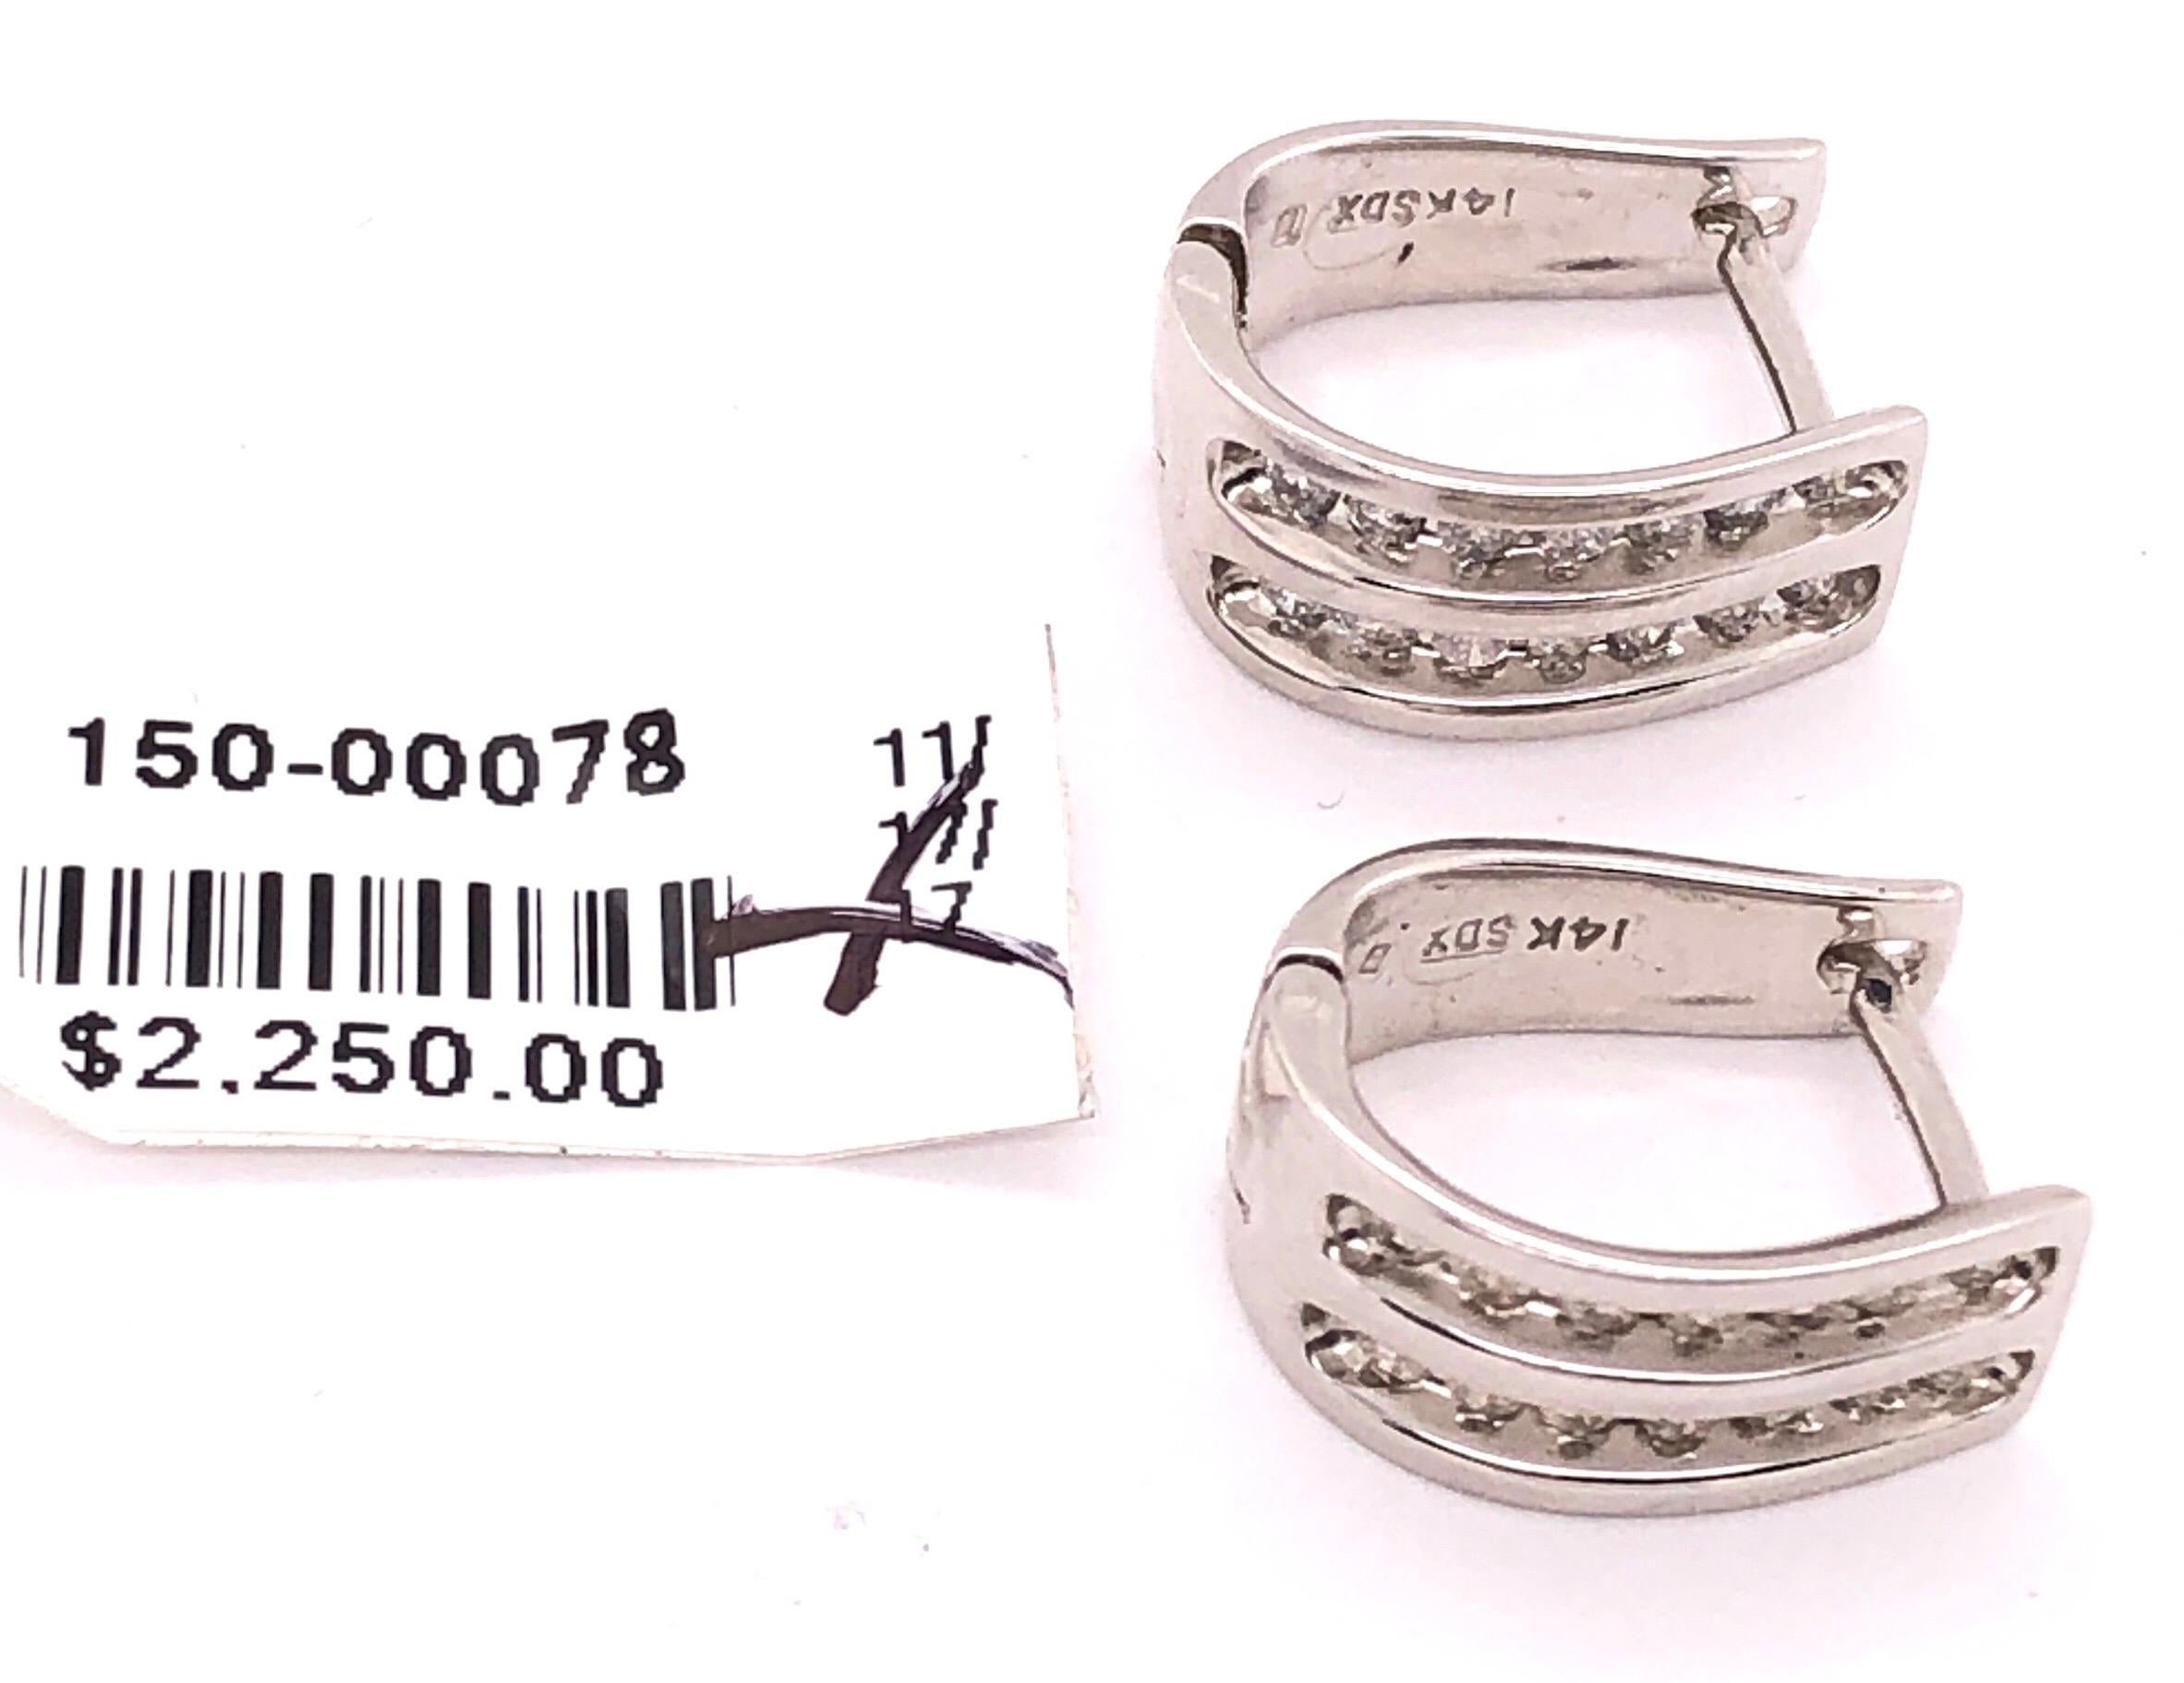 14 Karat White Gold Latch Back Earrings with 1.50 Total Diamond Weight For Sale 5